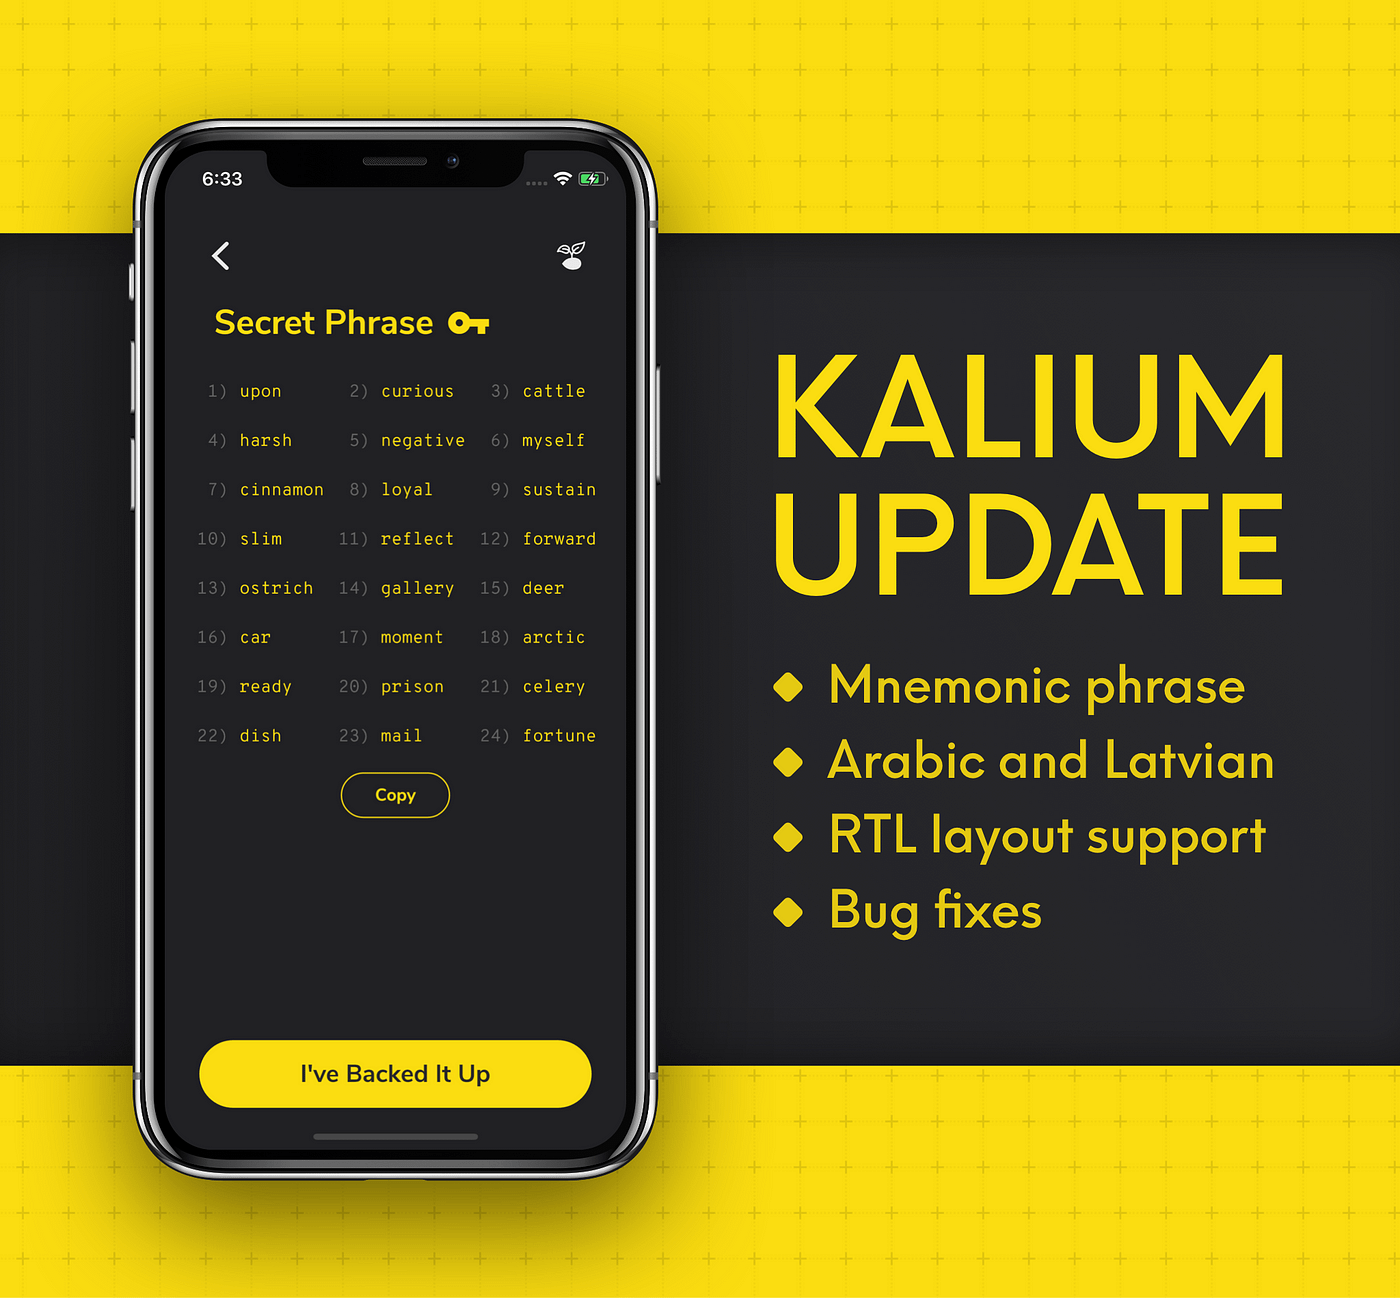 voorkomen beneden Spruit BANANO's — Kalium v2.0.9 Released Introducing Mnemonic Phrases, RTL  Layouts, and More. | by Purian23 | Banano | Medium